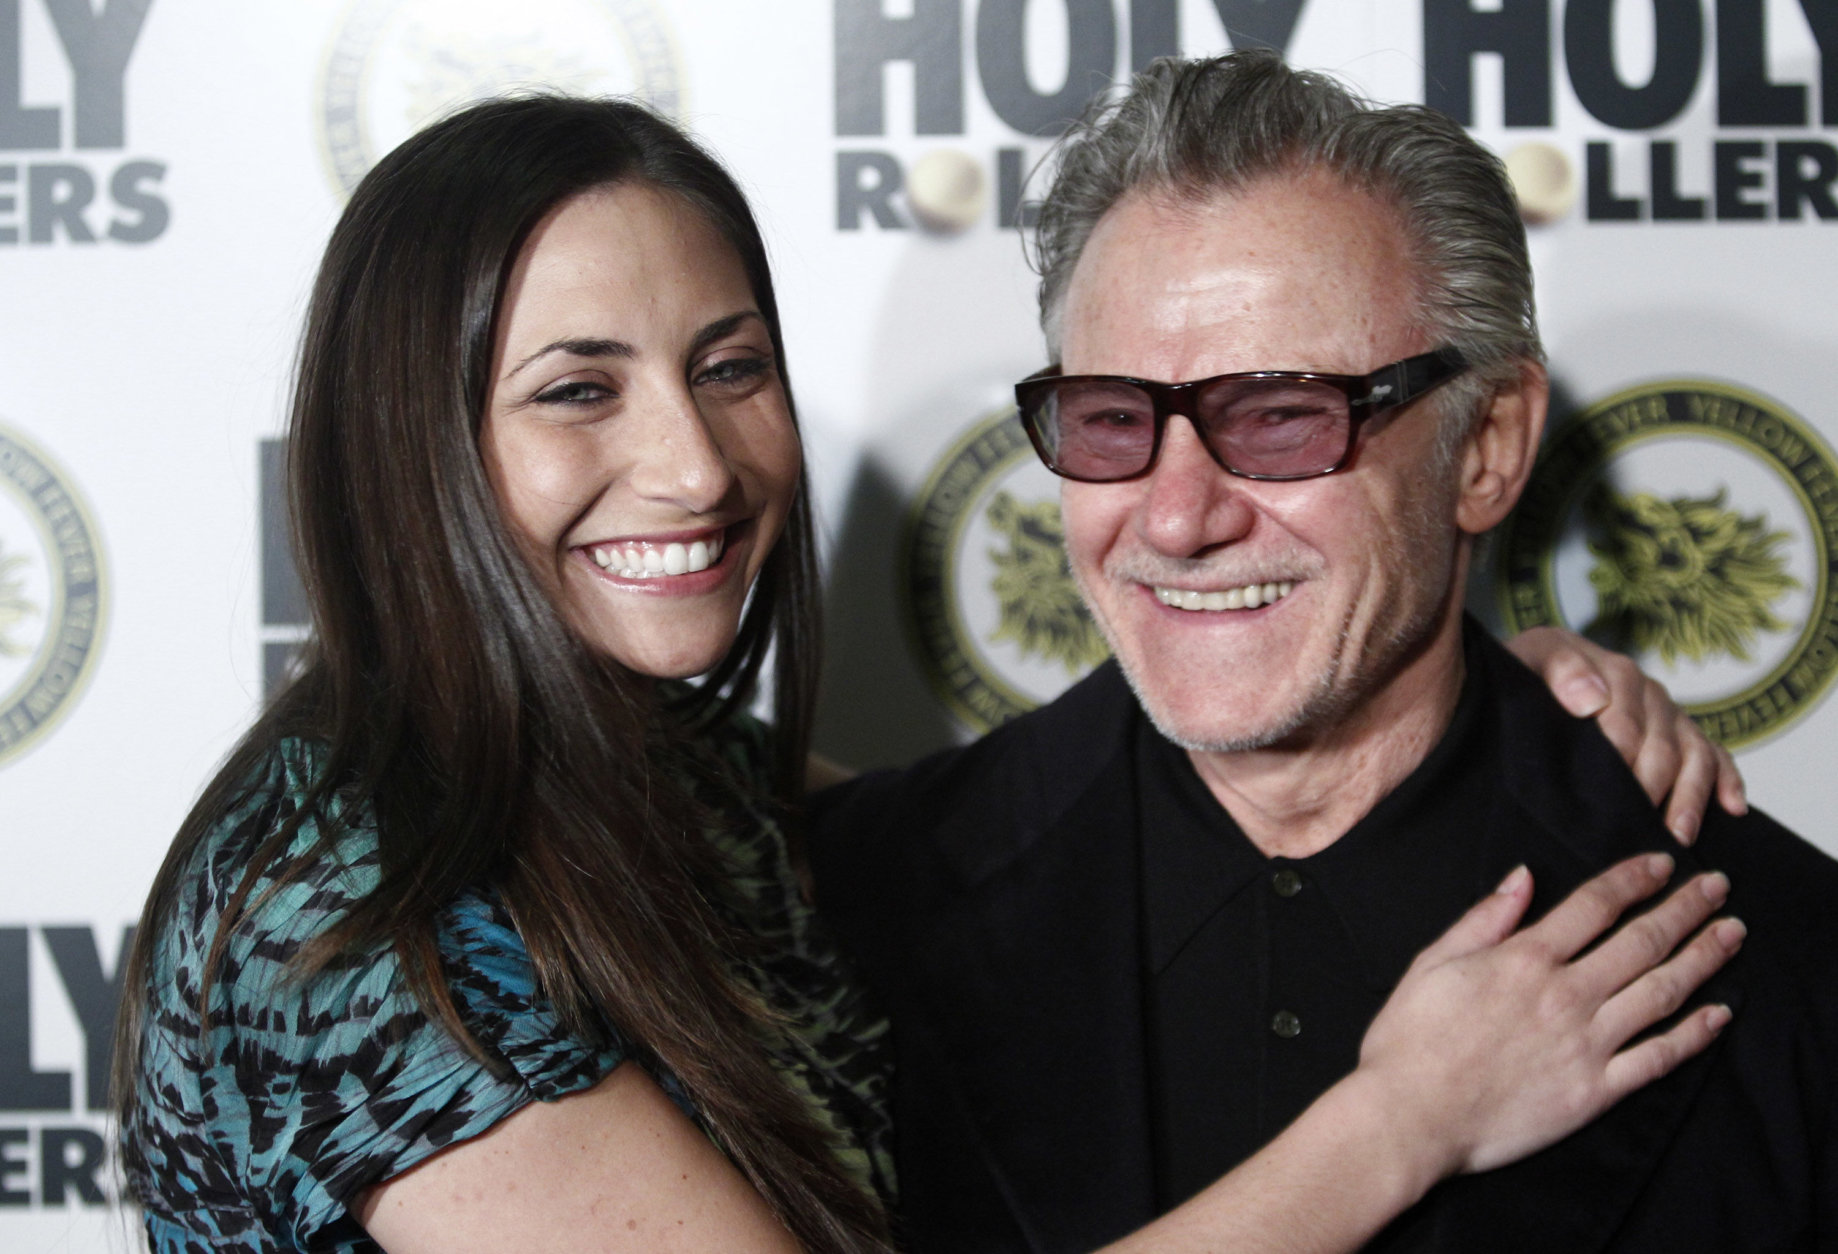 Actor Harvey Keitel and daughter Stella Keitel arrive to the premiere of "Holy Rollers" in New York on Monday, May 10, 2010. (AP Photo/Peter Kramer)